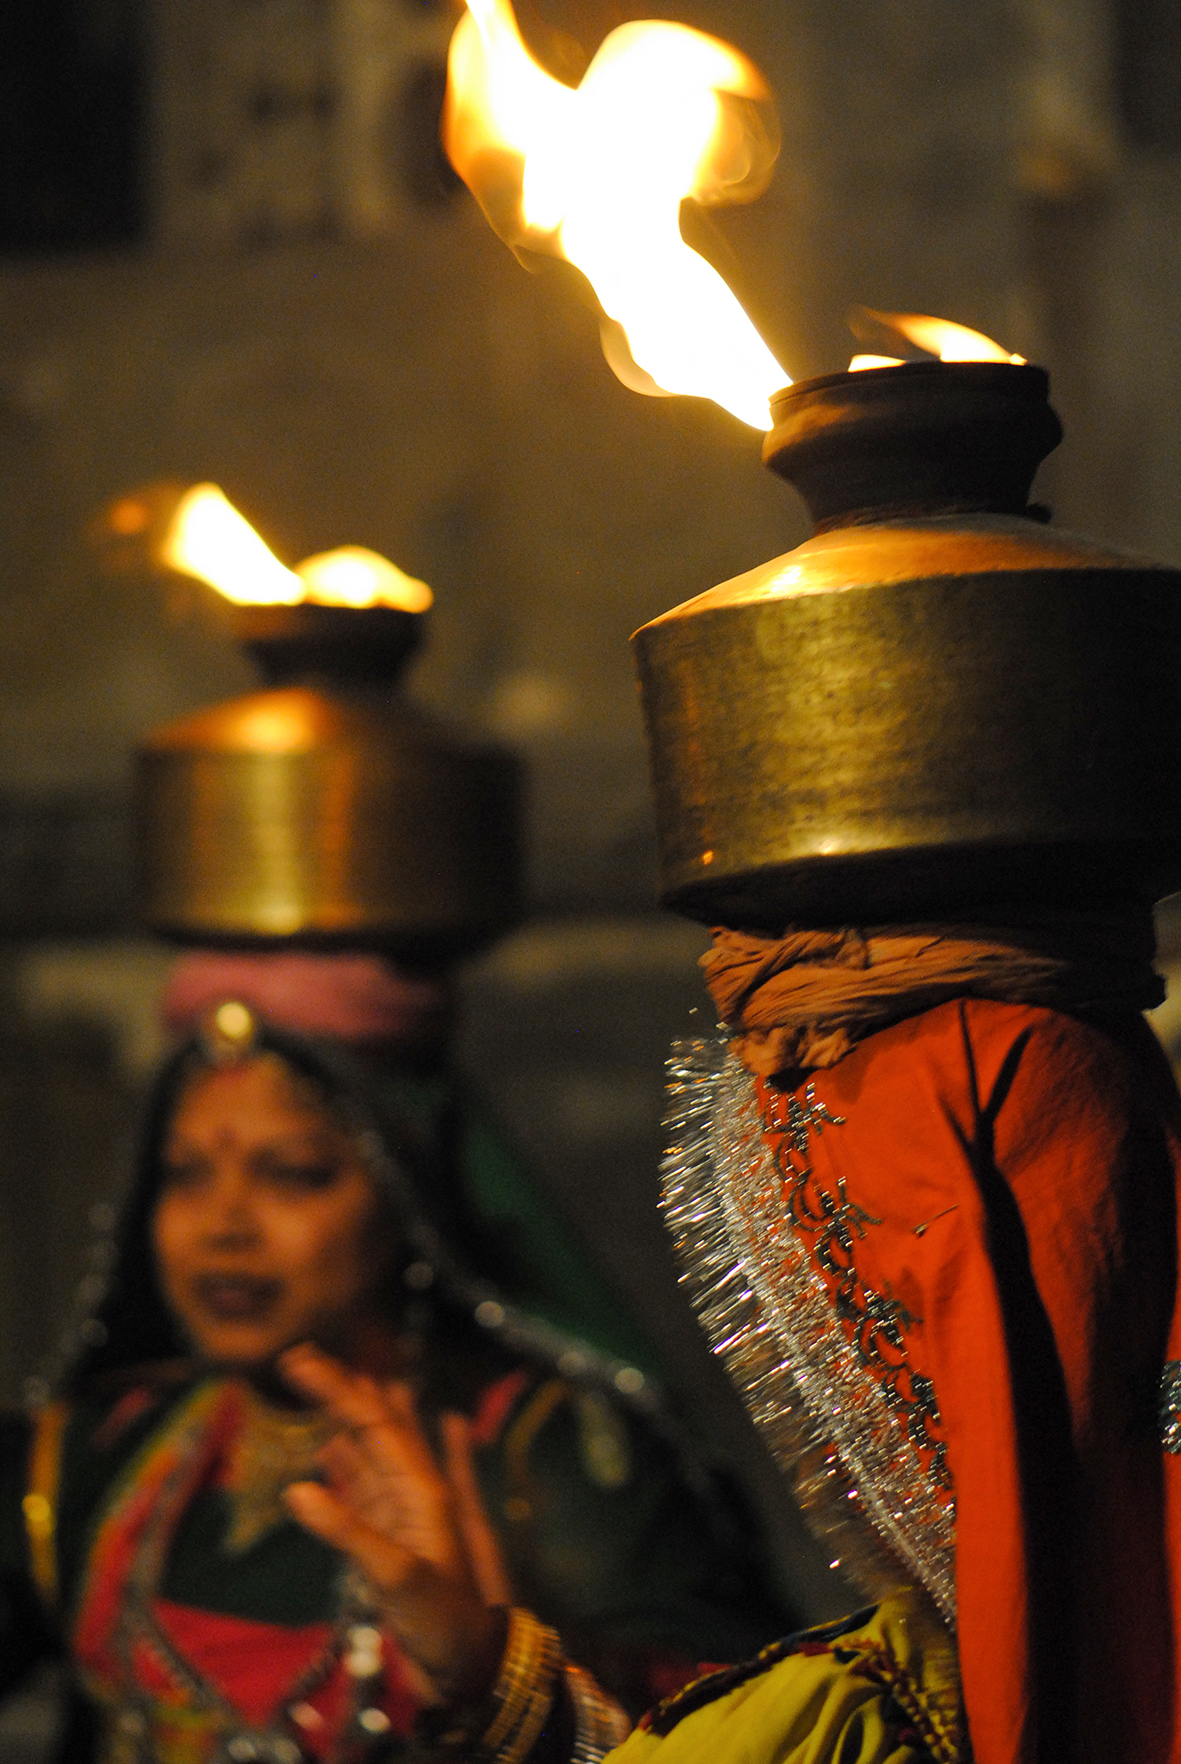 The women dance while balancing brass chari on their heads. The chari ritualistic dance is usually performed on special occasions, such as marriages or festivals.